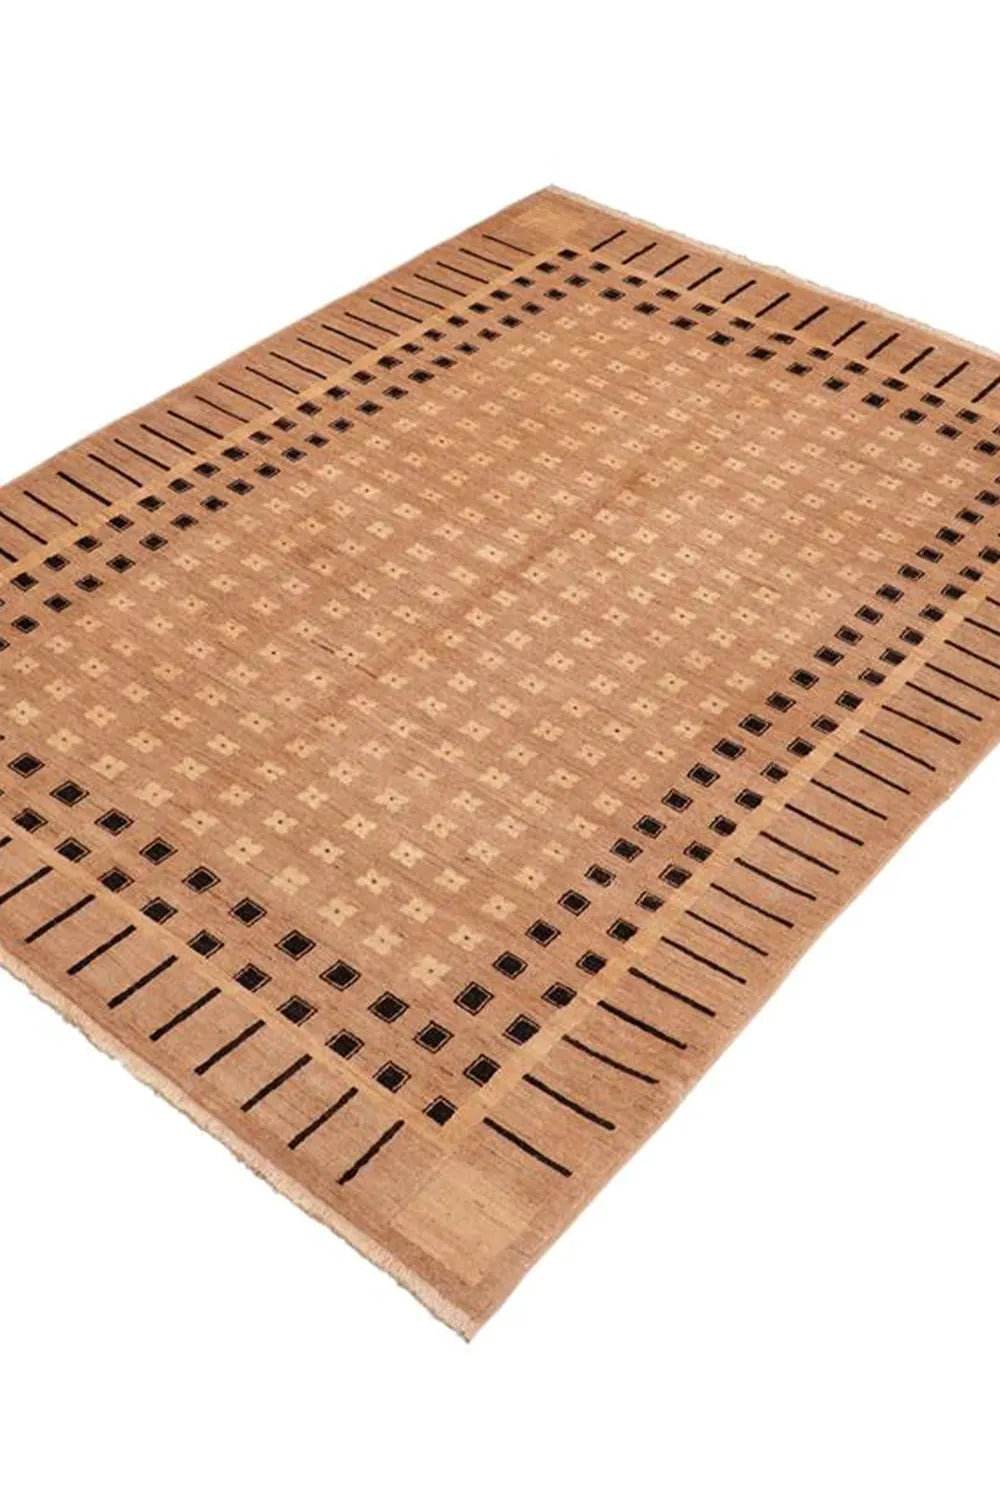 Elegant hand-knotted mid-century rug, perfect for a modern interior design.